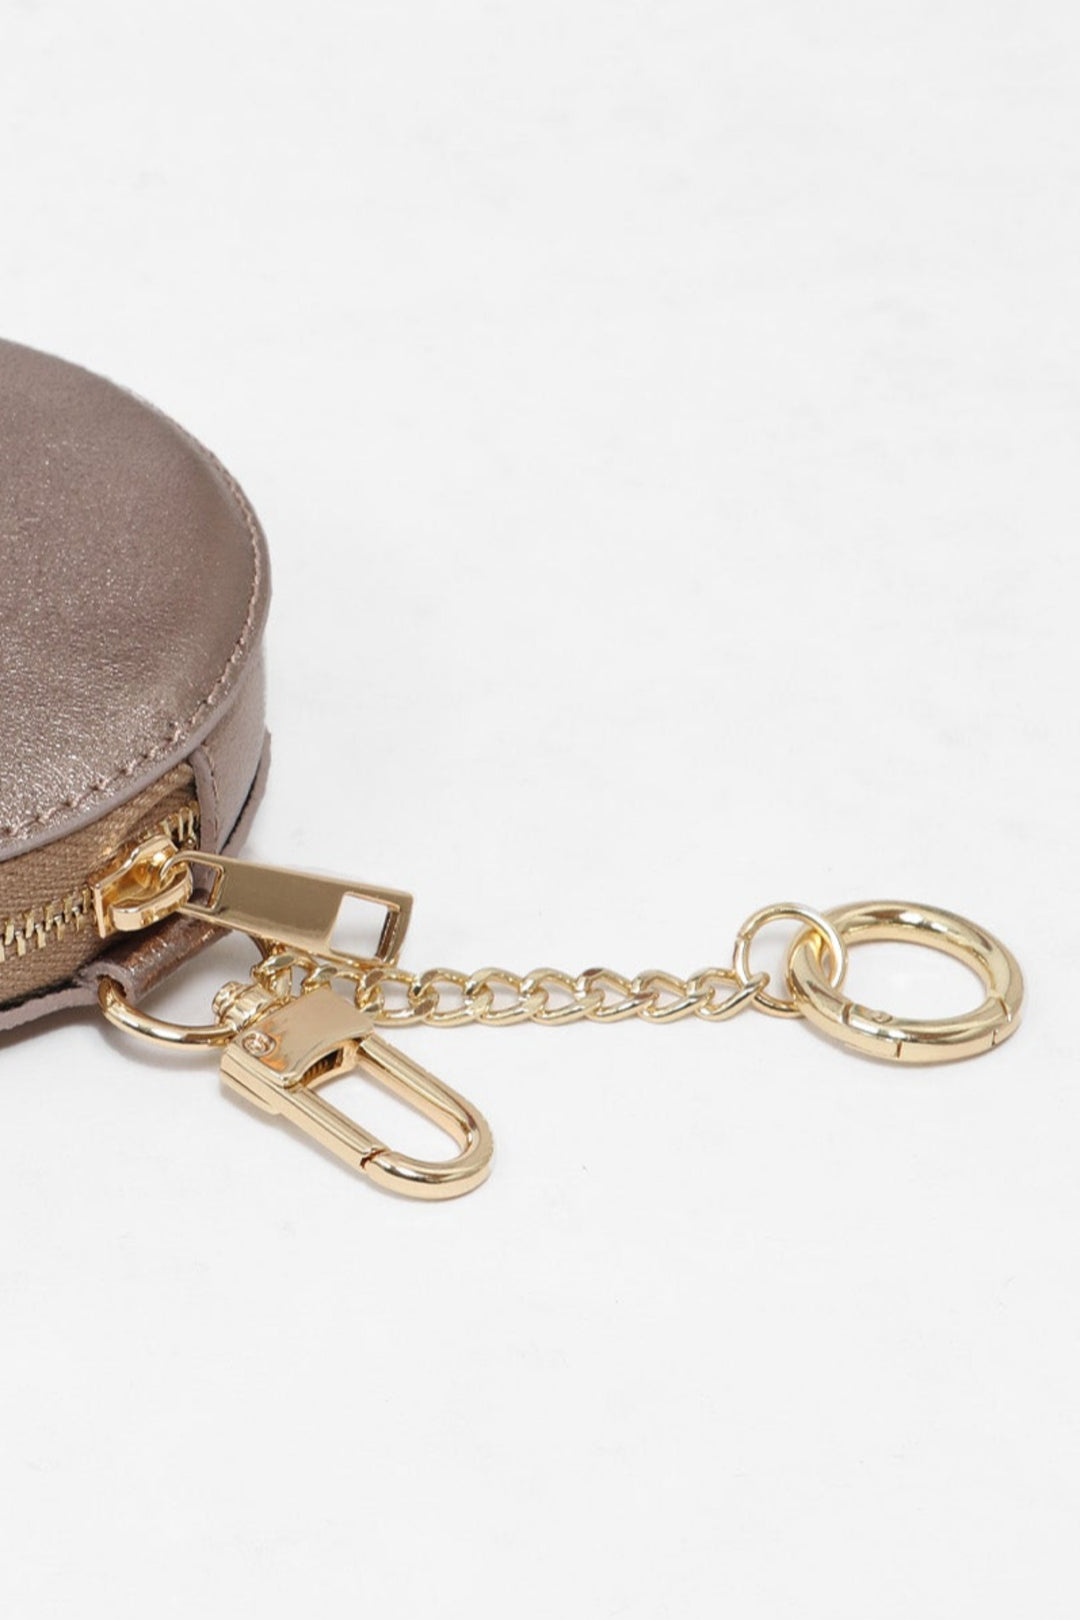 Champagne Leather Round Clip-On Coin Purse